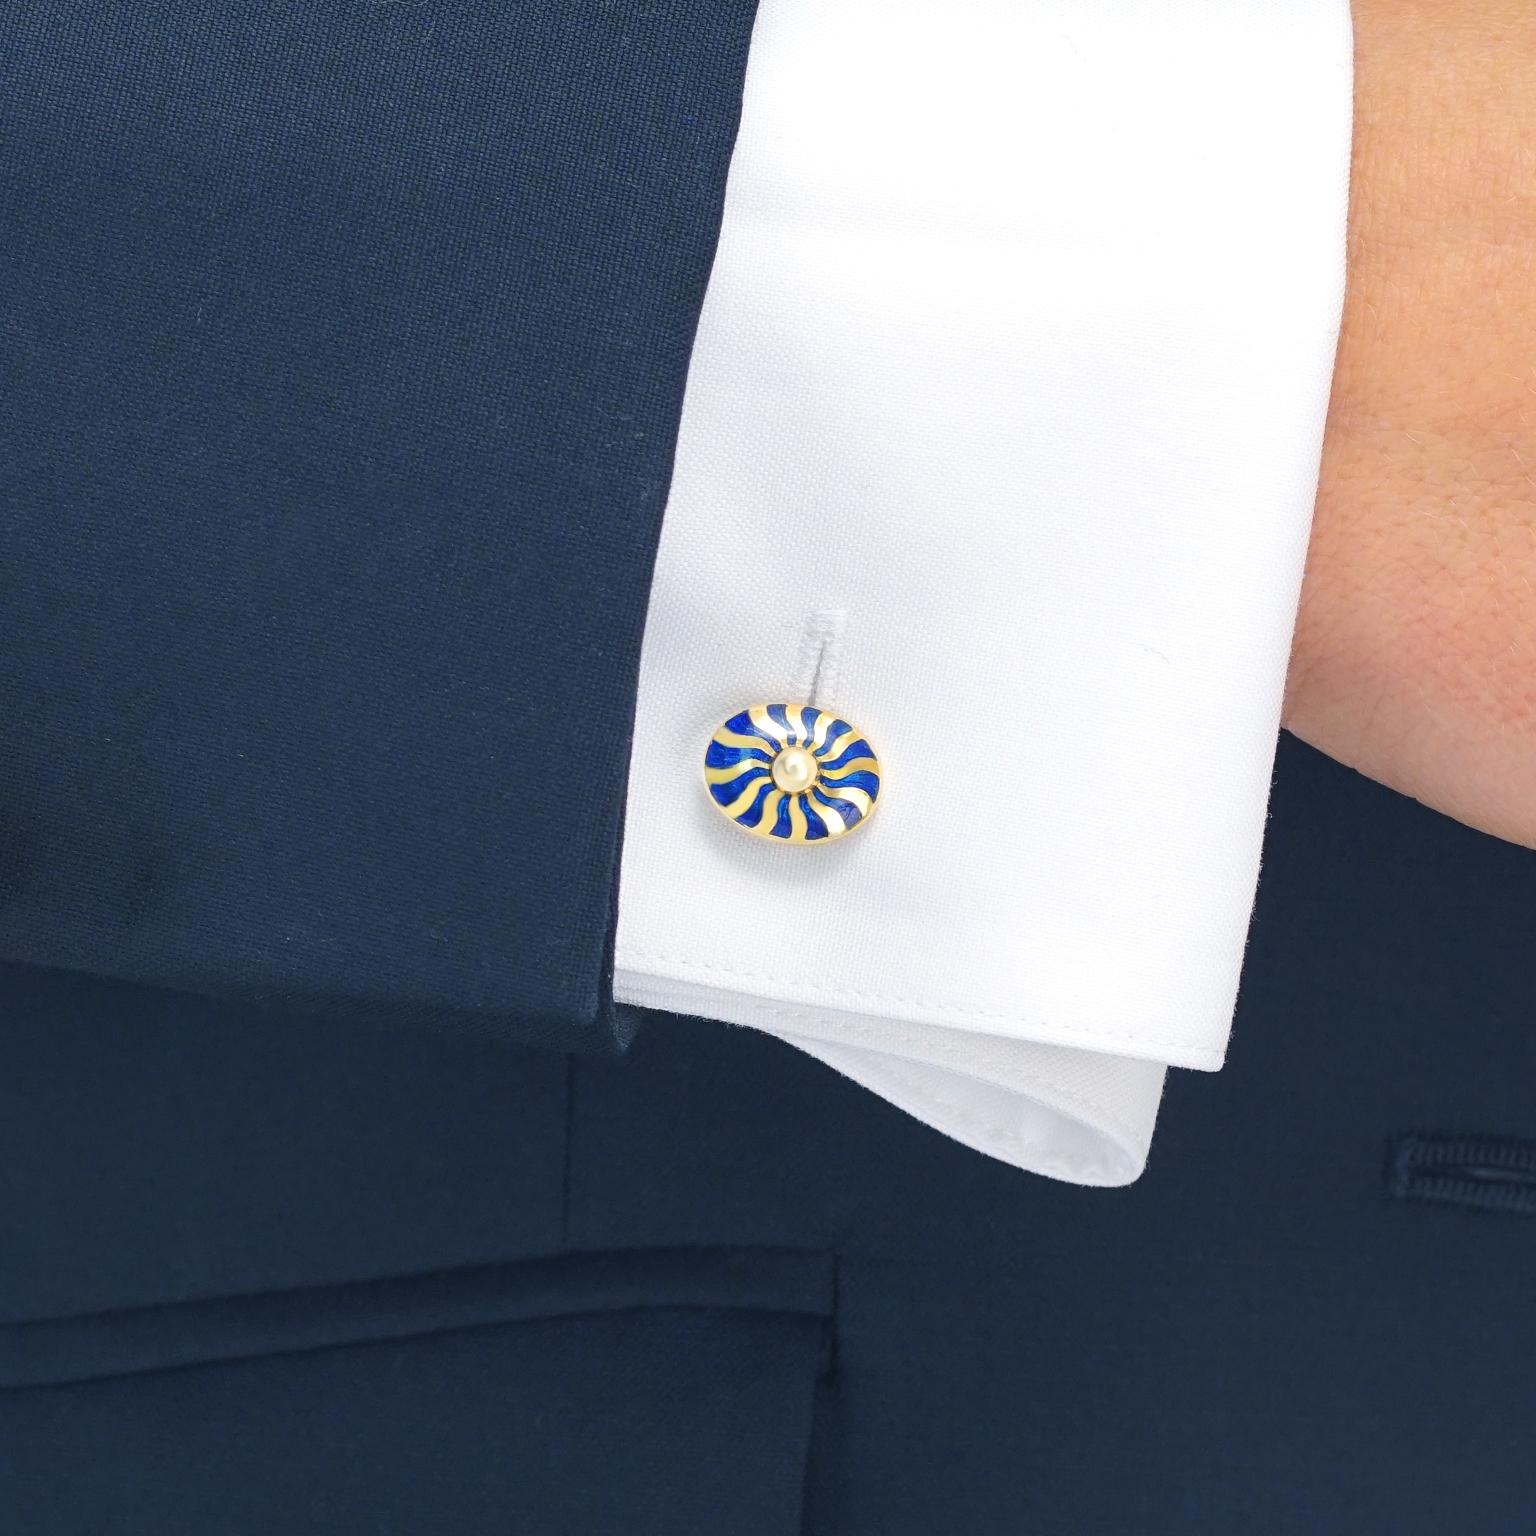 Circa 1980s, 18k, London.  These chic eighties cufflinks represent the best of vintage London style. Blue enamel sunbursts will tastefully add style and verve to any suit or jacket. Beautifully made, they are in good condition.

Remark: “Cufflinks